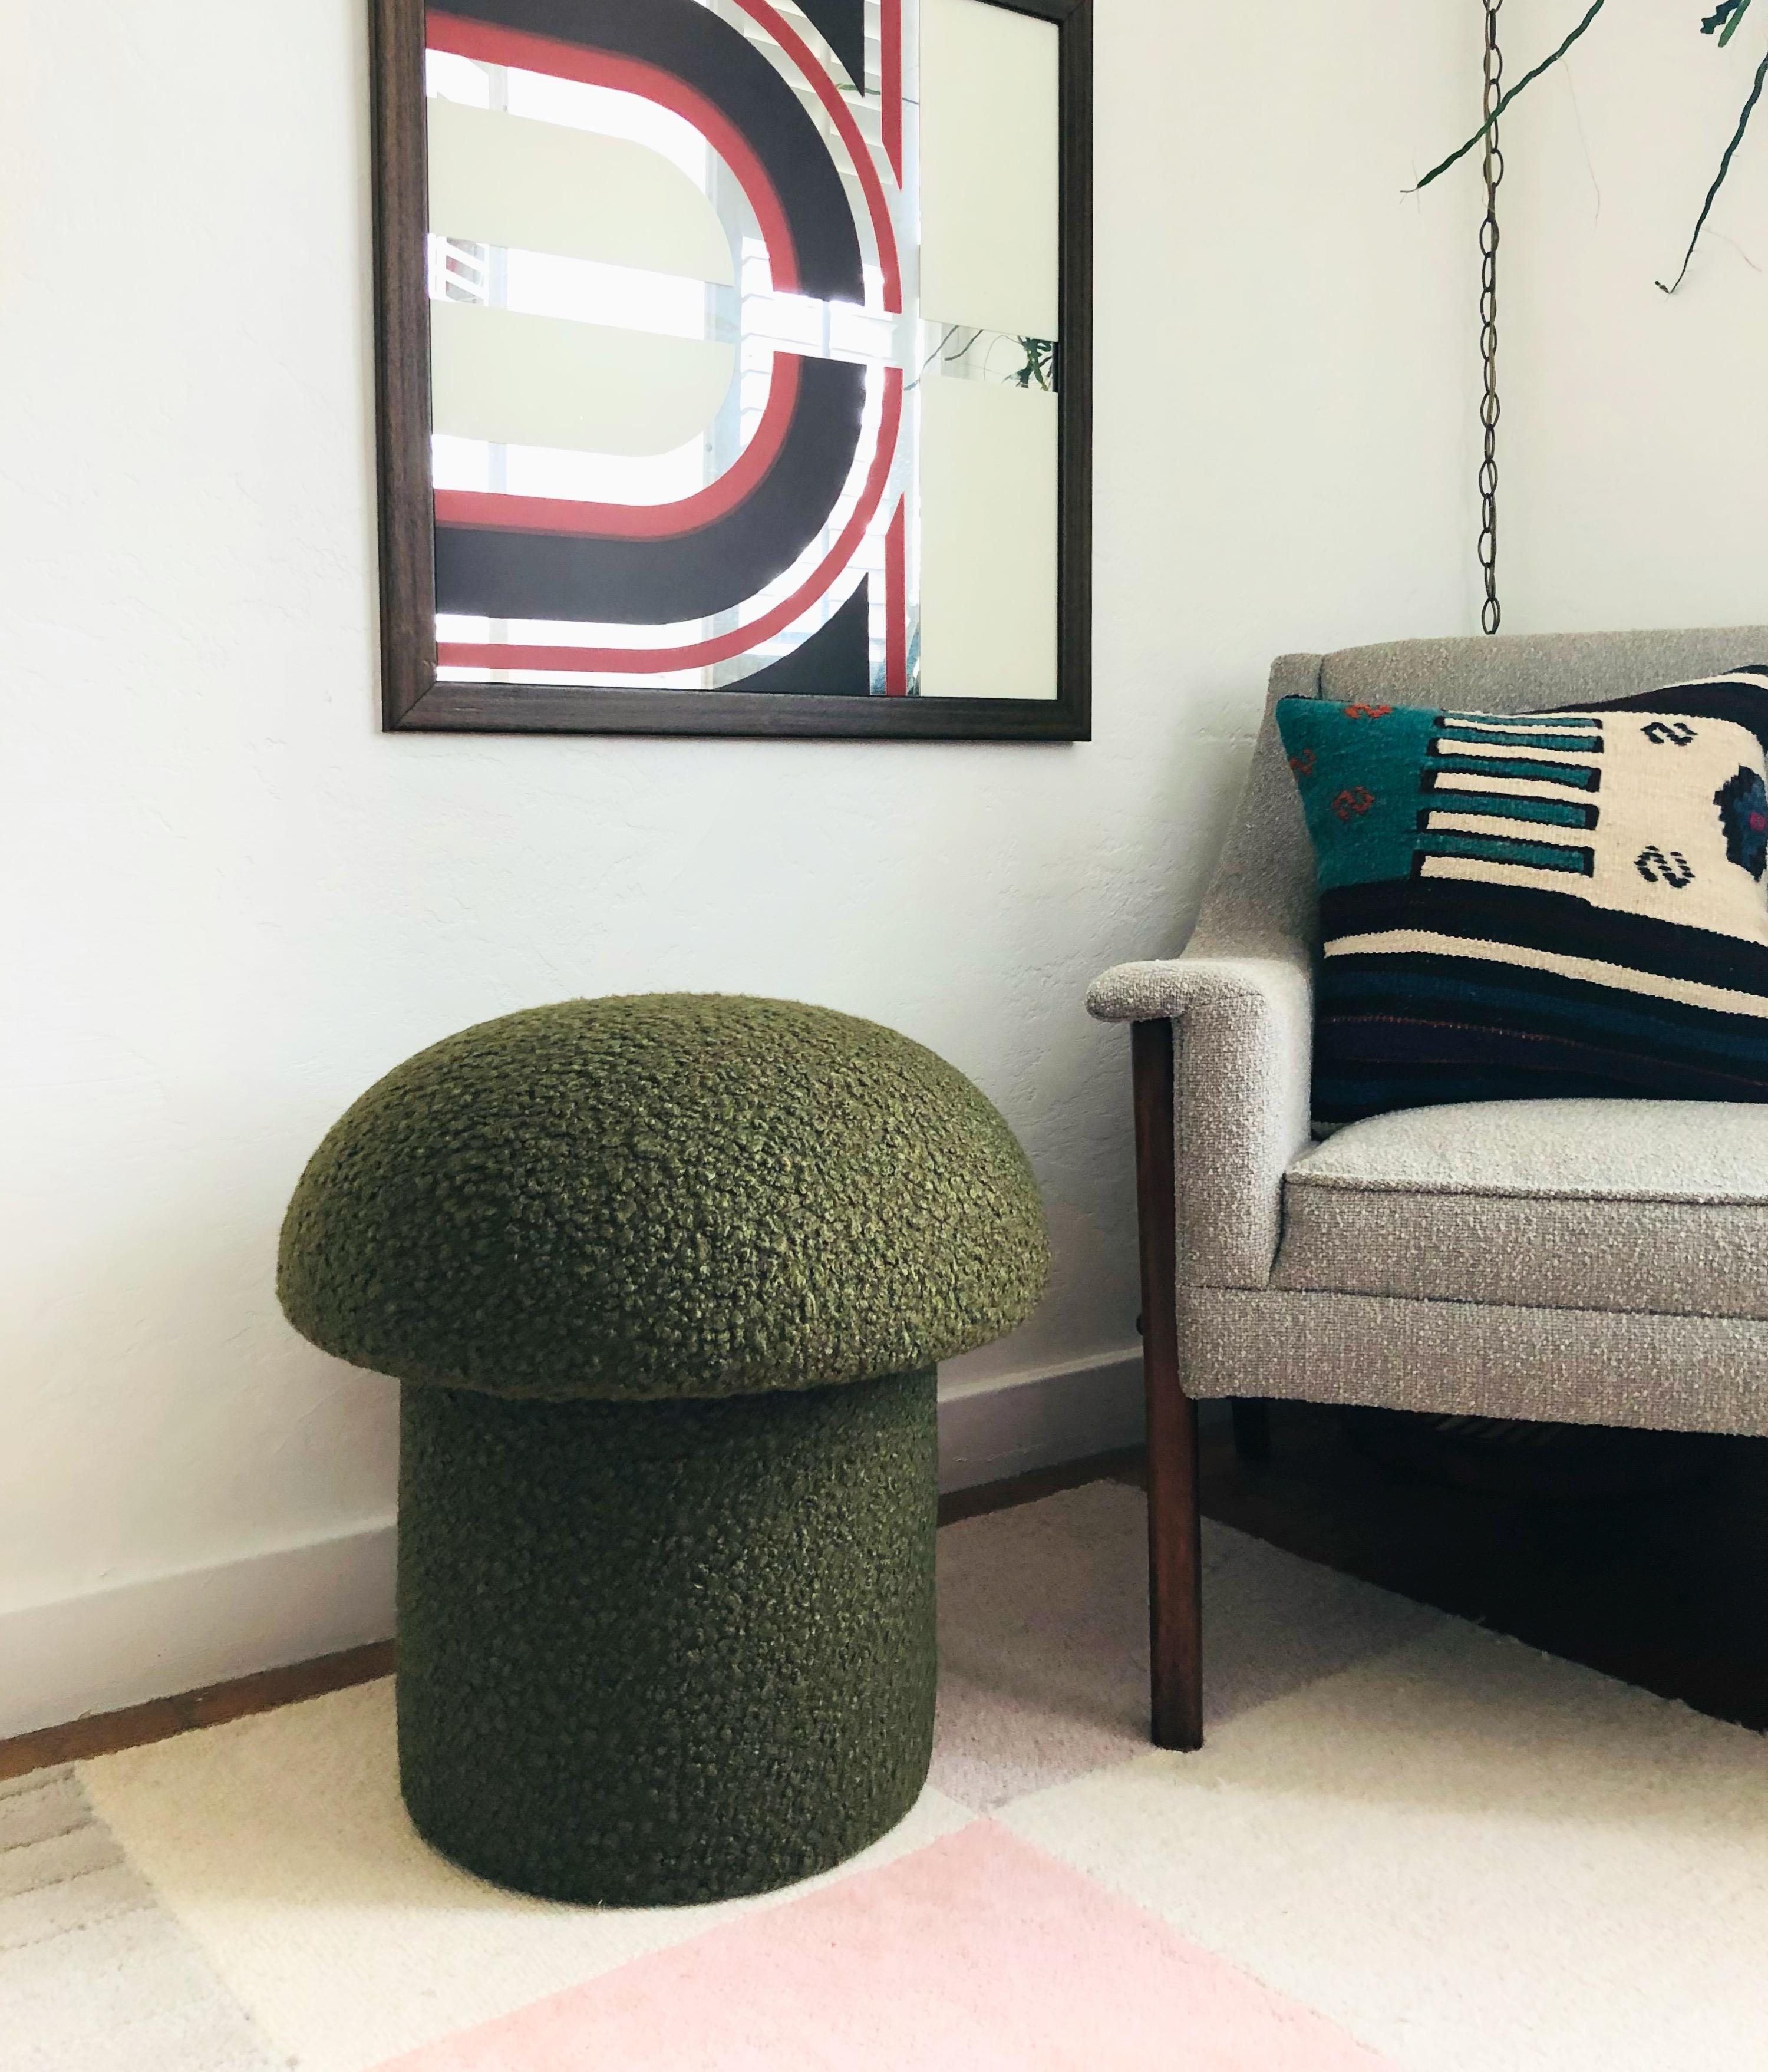 A handmade mushroom shaped ottoman, upholstered in an olive green colored curly boucle fabric. Perfect for using as a footstool or extra occasional seating. A great sculptural accent piece.

PLEASE NOTE:
Color variations may occur due to different